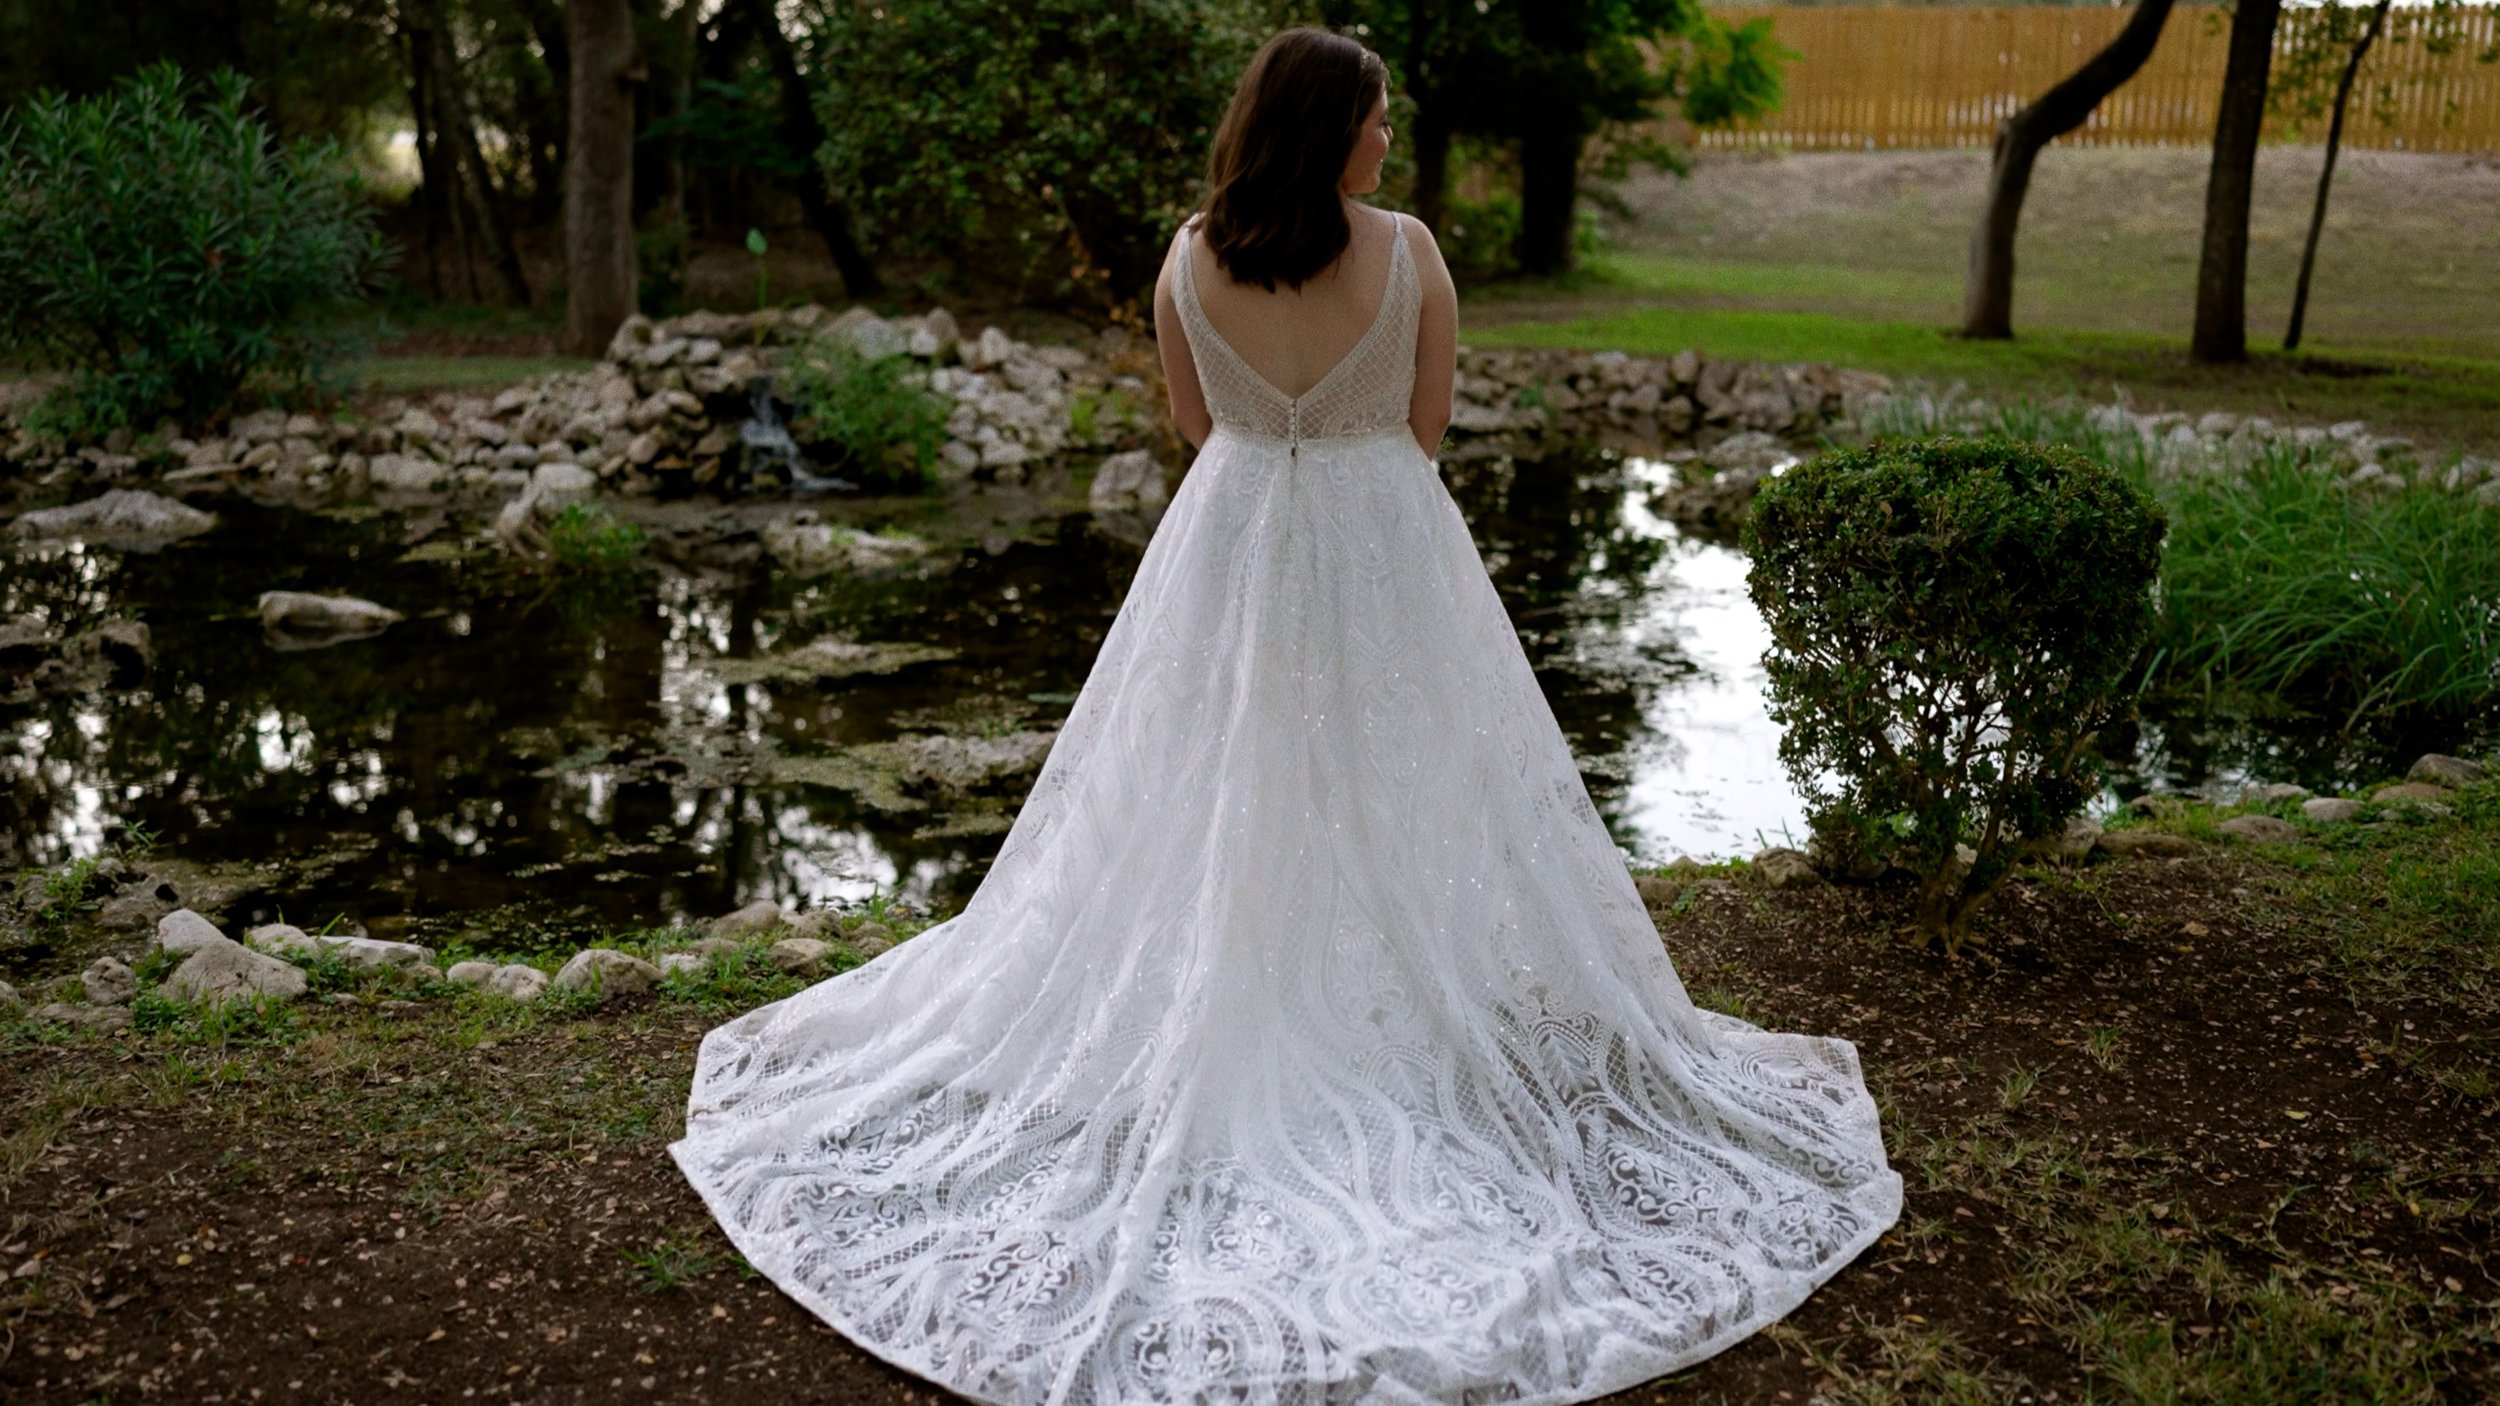 back of bride dress posed next to pond outside